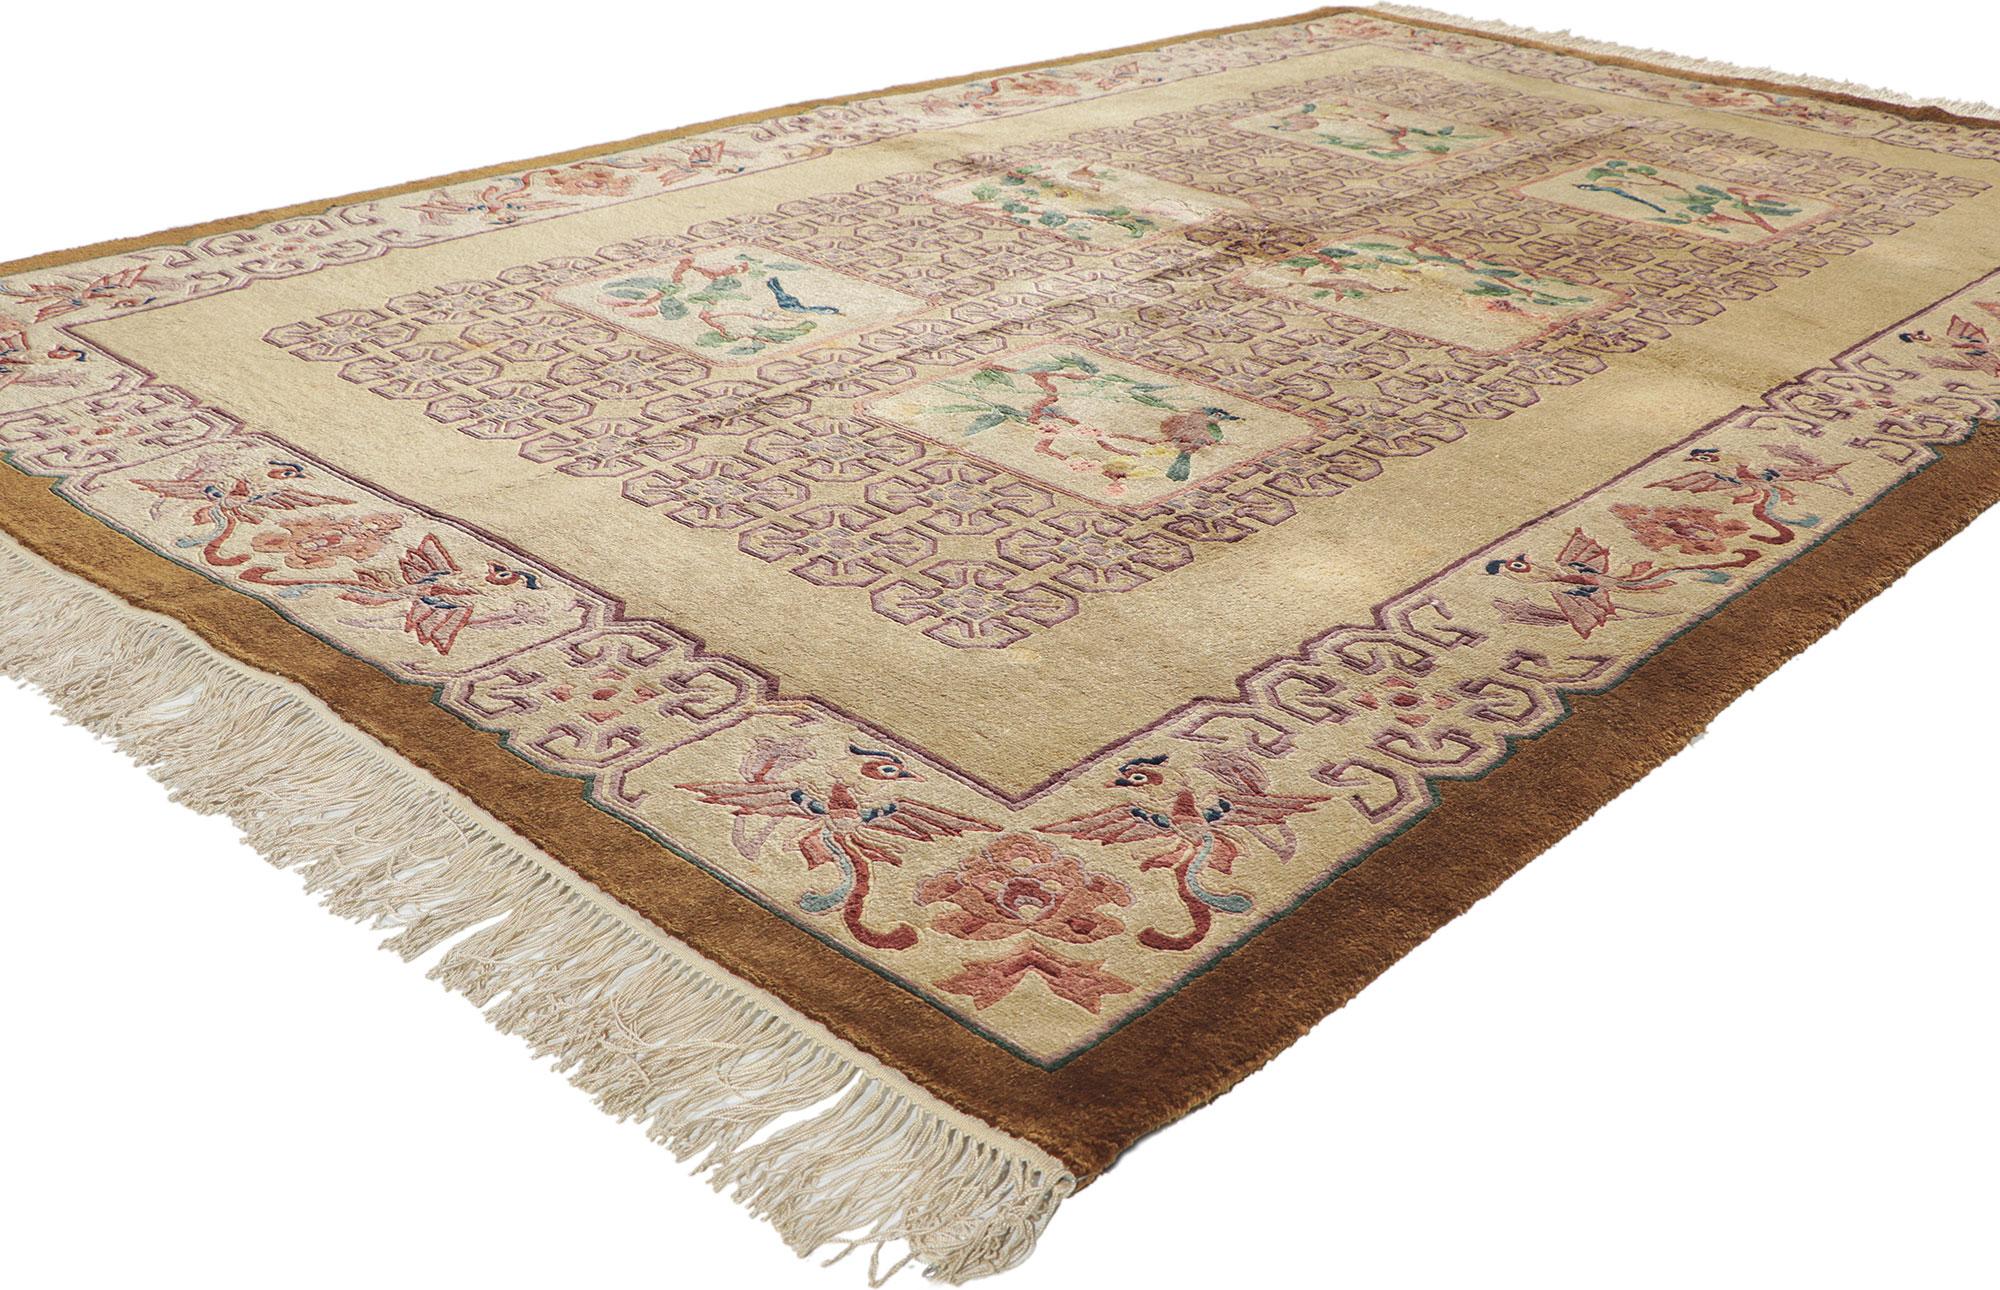 74866 Vintage Chinese Tang Dynasty Rug, 05'00 x 07'11.
This hand-knotted wool vintage Chinese rug features six rectangular pictorial vignettes floating on a patterned backdrop reminiscent of ancient Chinese stone carvings. Inspired by weavings from